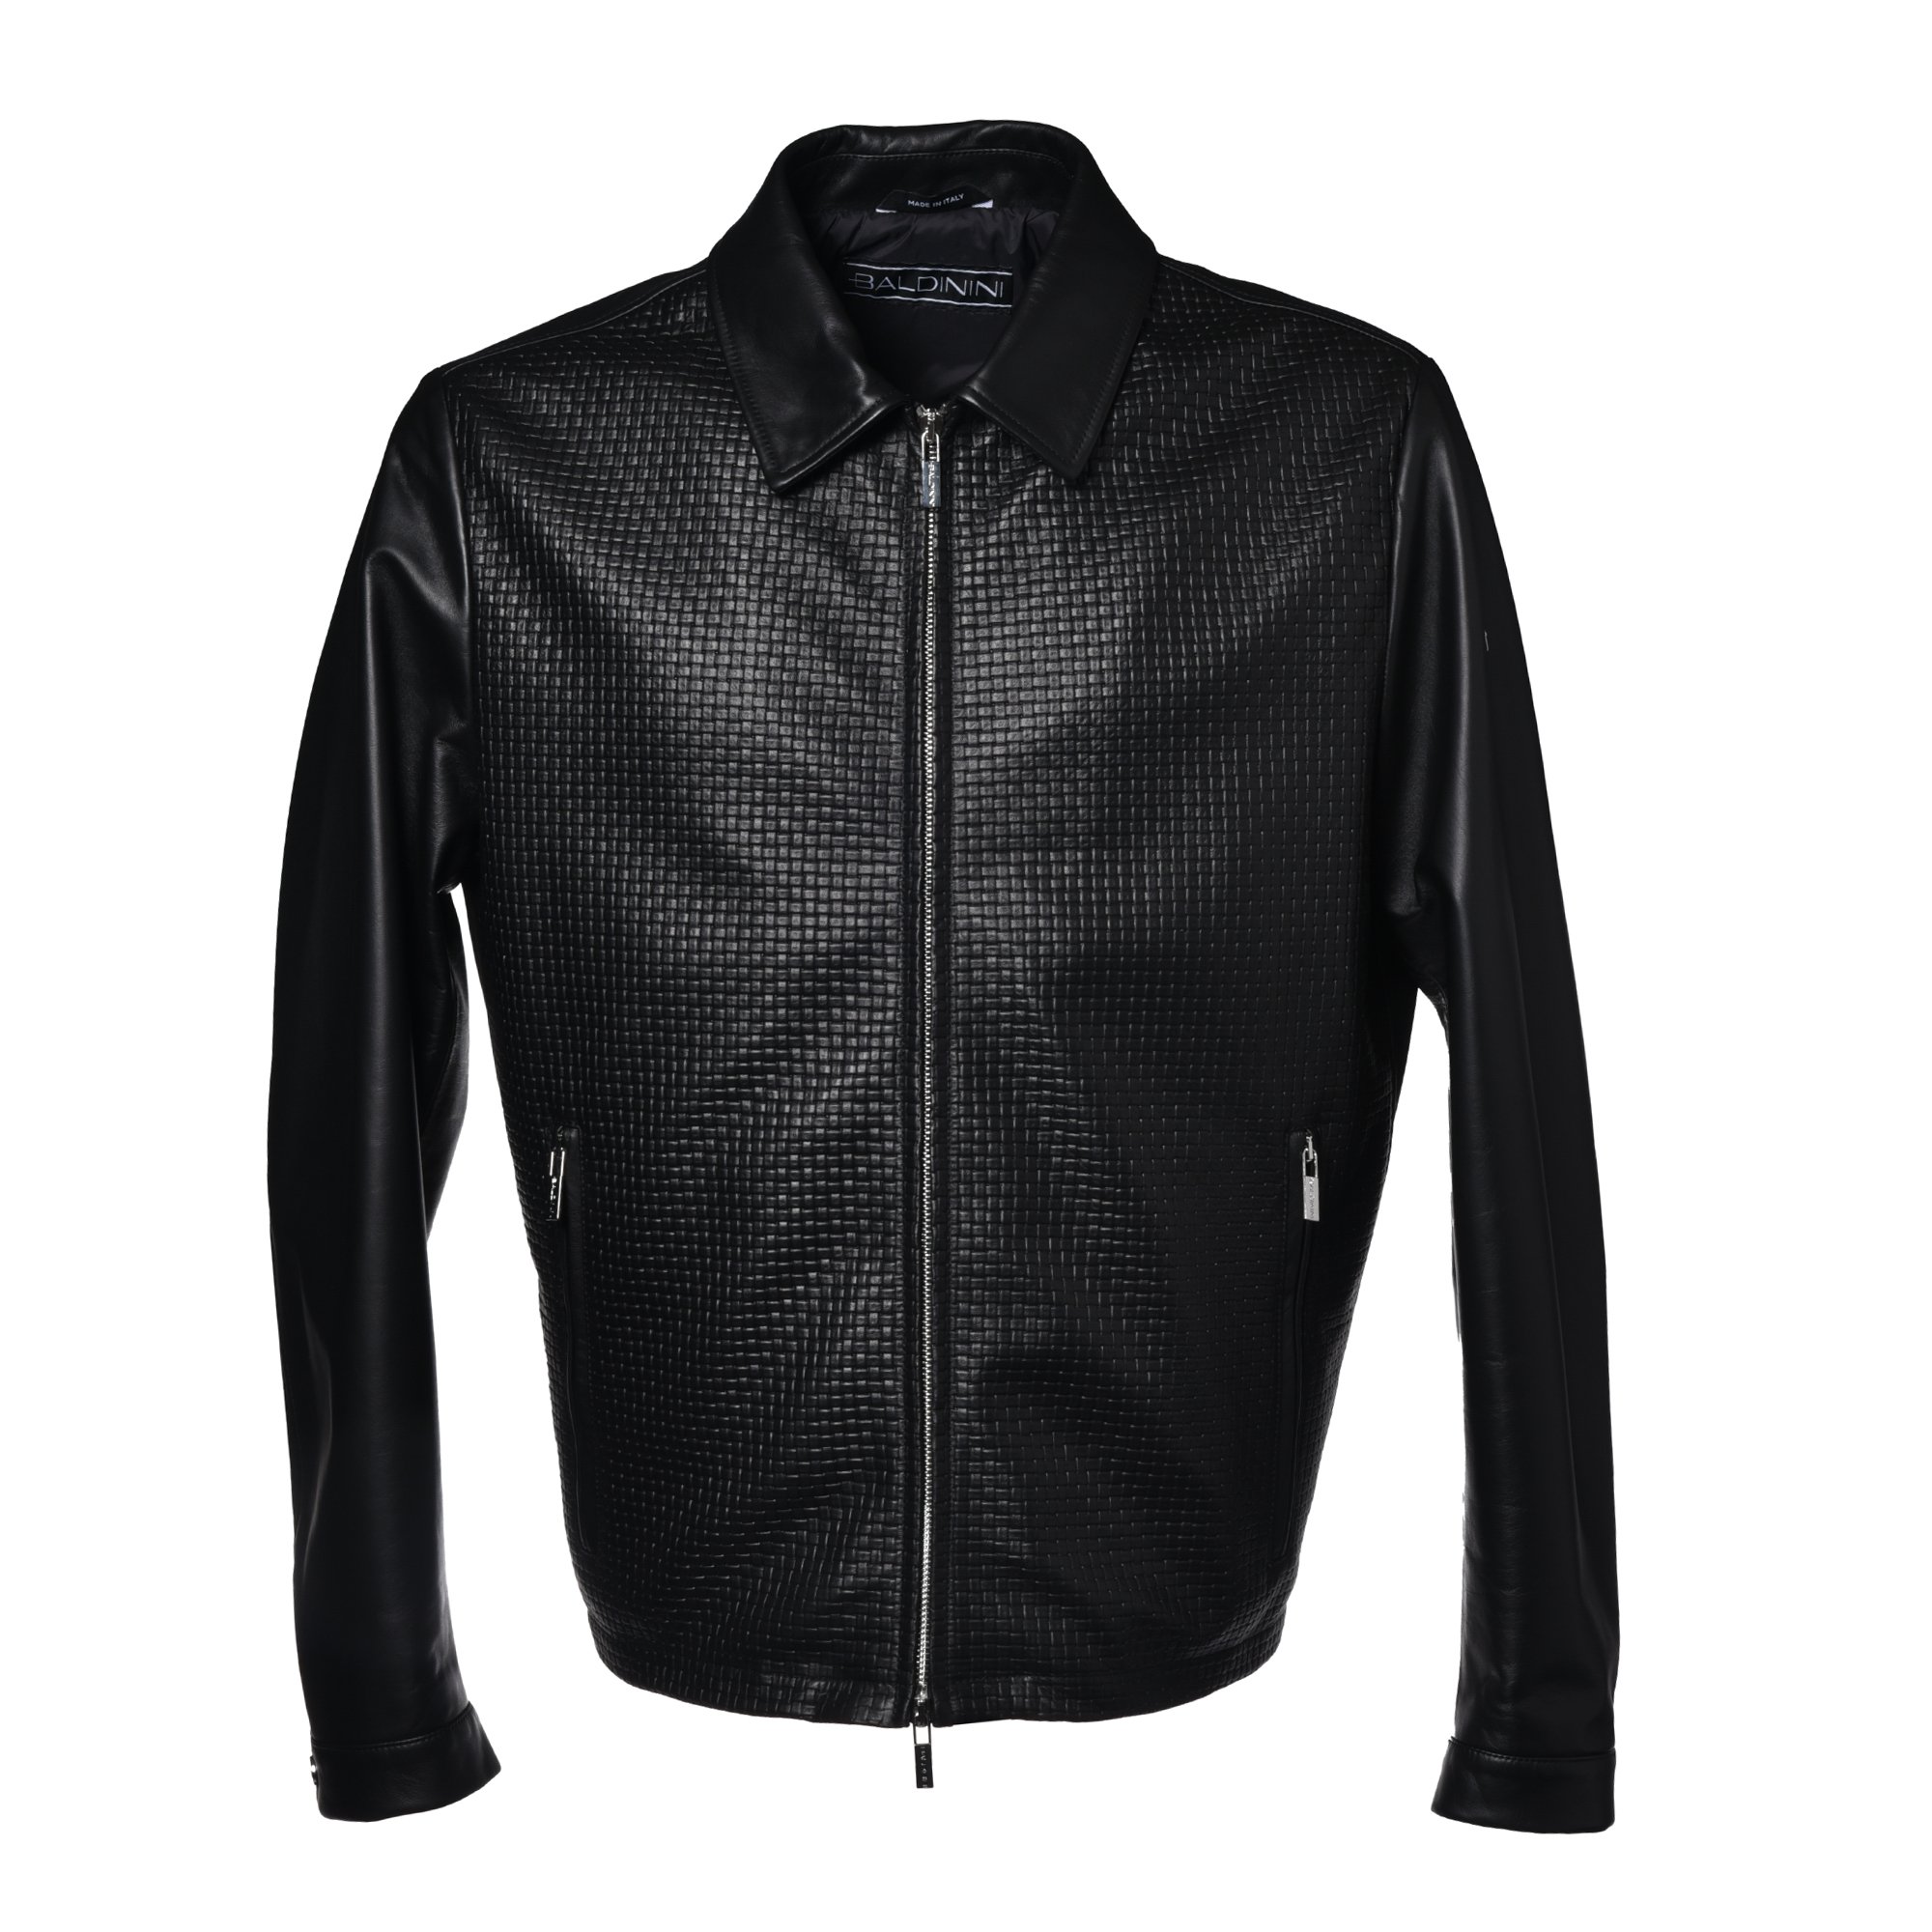 Jacket in black nappa leather image